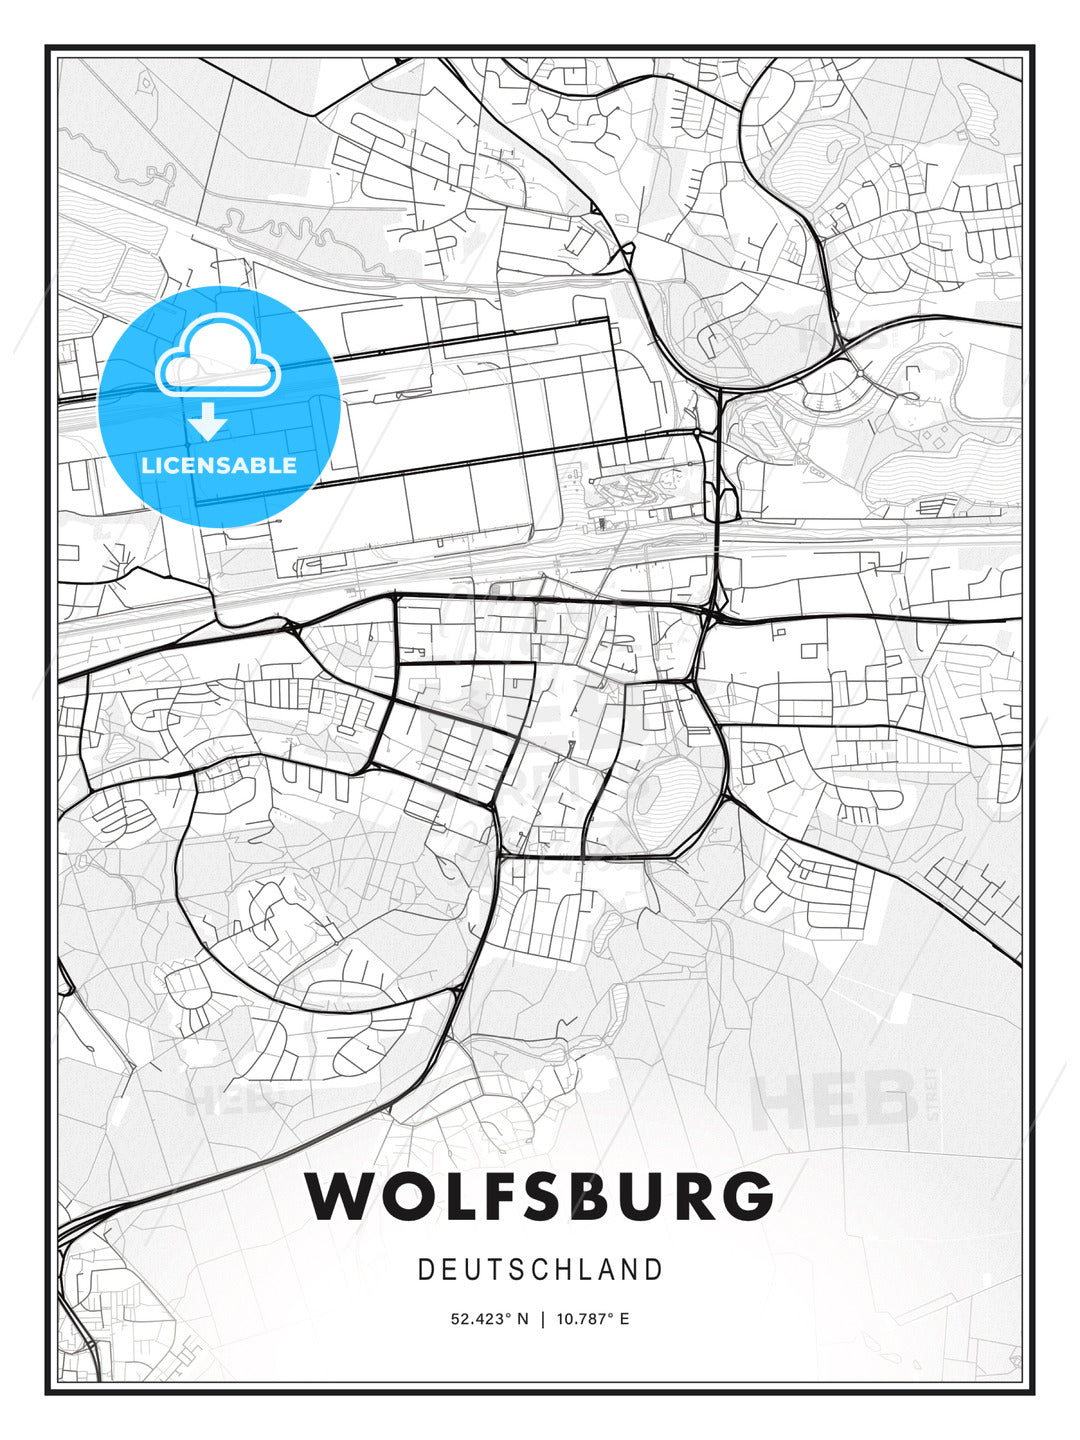 Wolfsburg, Germany, Modern Print Template in Various Formats - HEBSTREITS Sketches